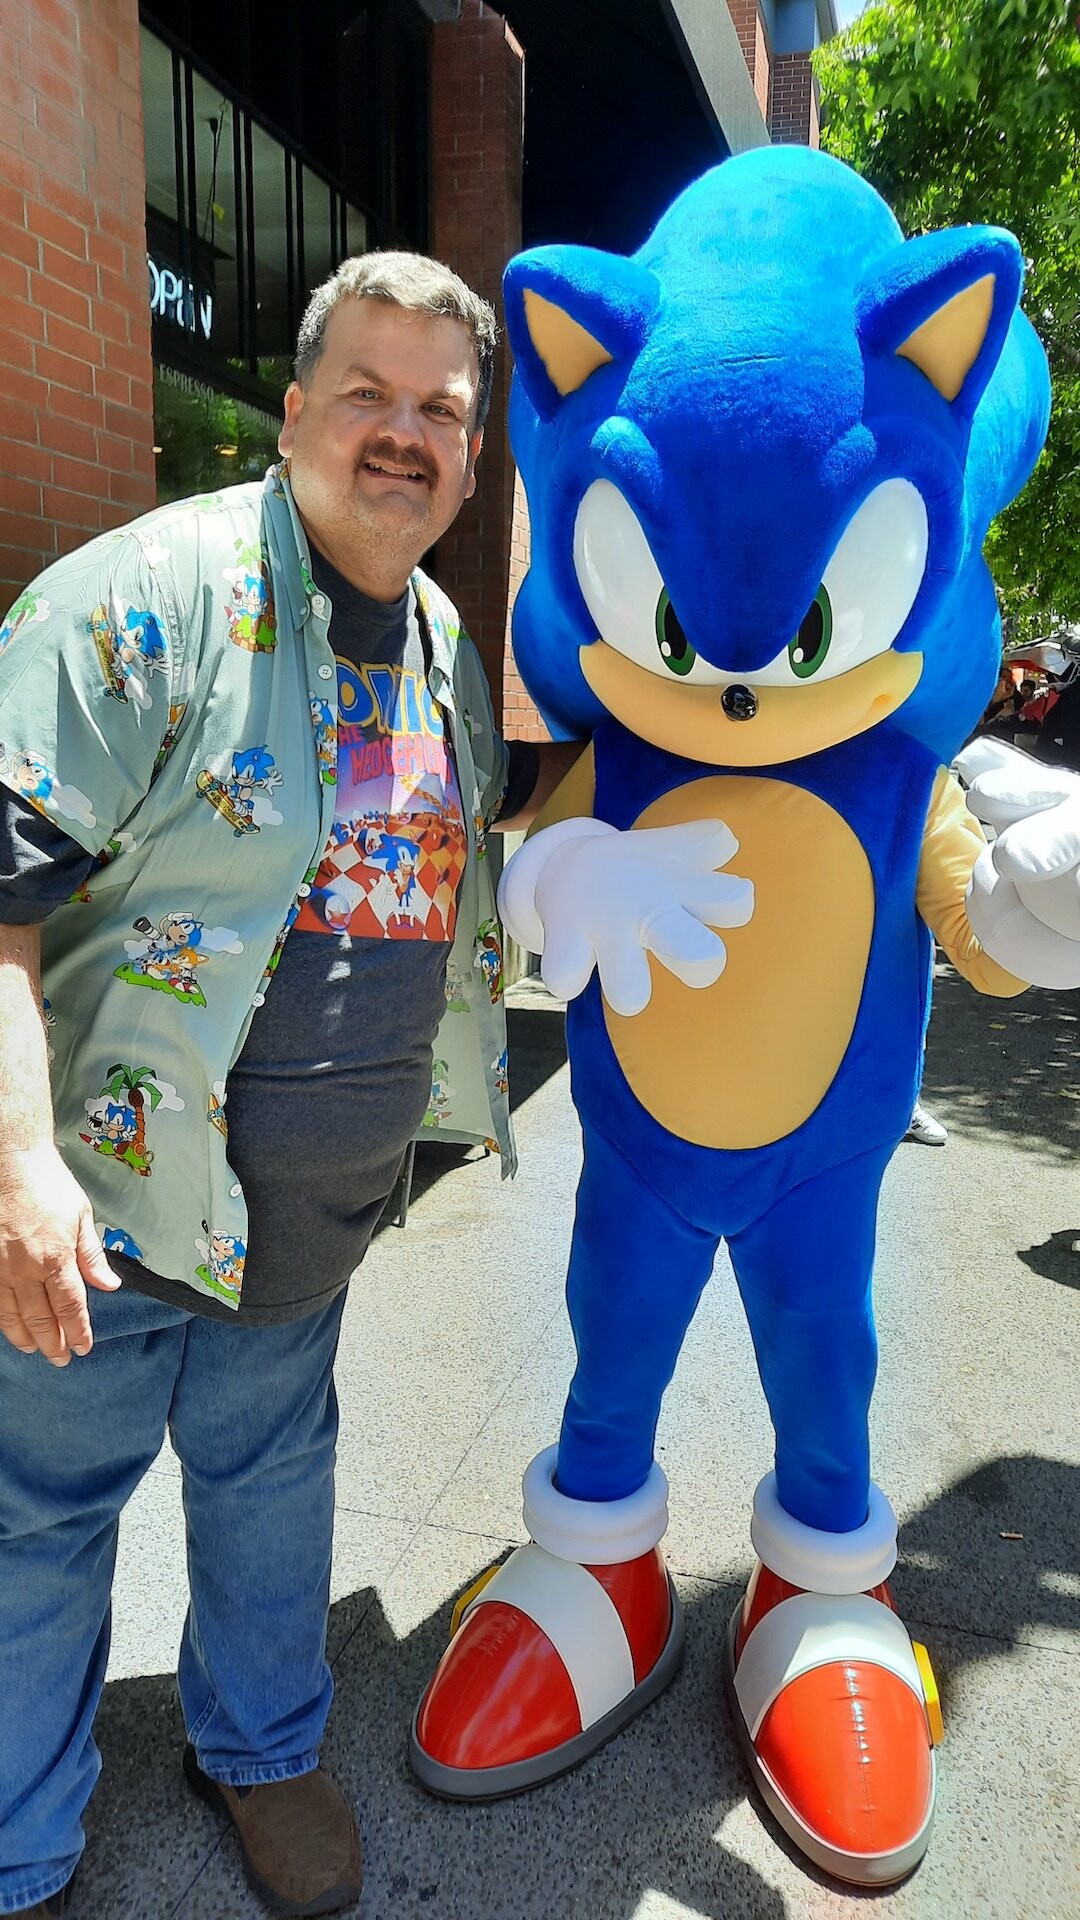 Sonic the Hedgehog Restaurant Coming to San Diego Comic-Con 2023